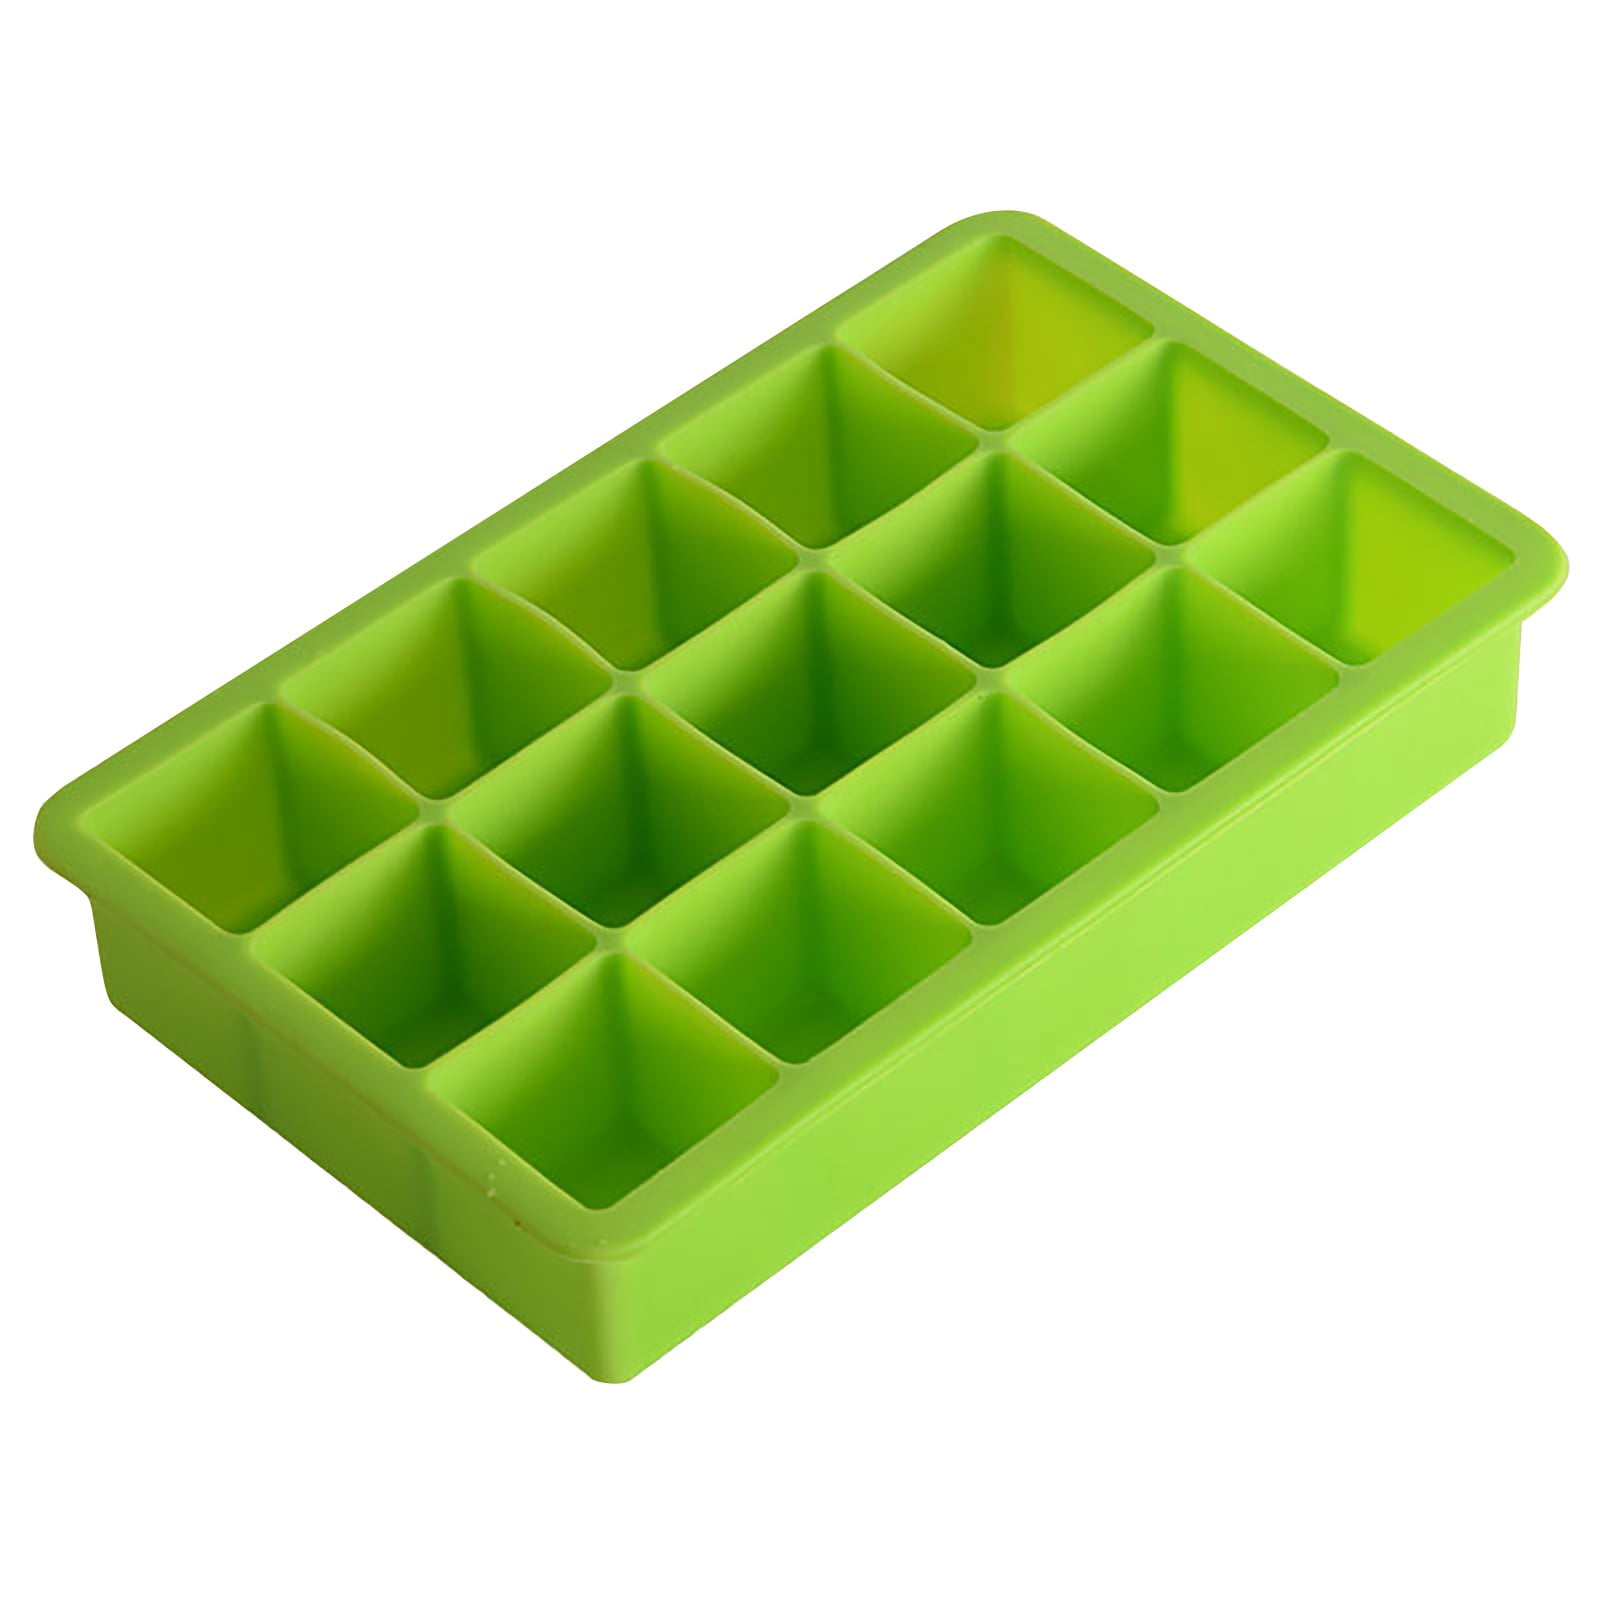 Silicone Ice Tray / Mold - 5.25 Slab - 4 Molds - 1 Count Box